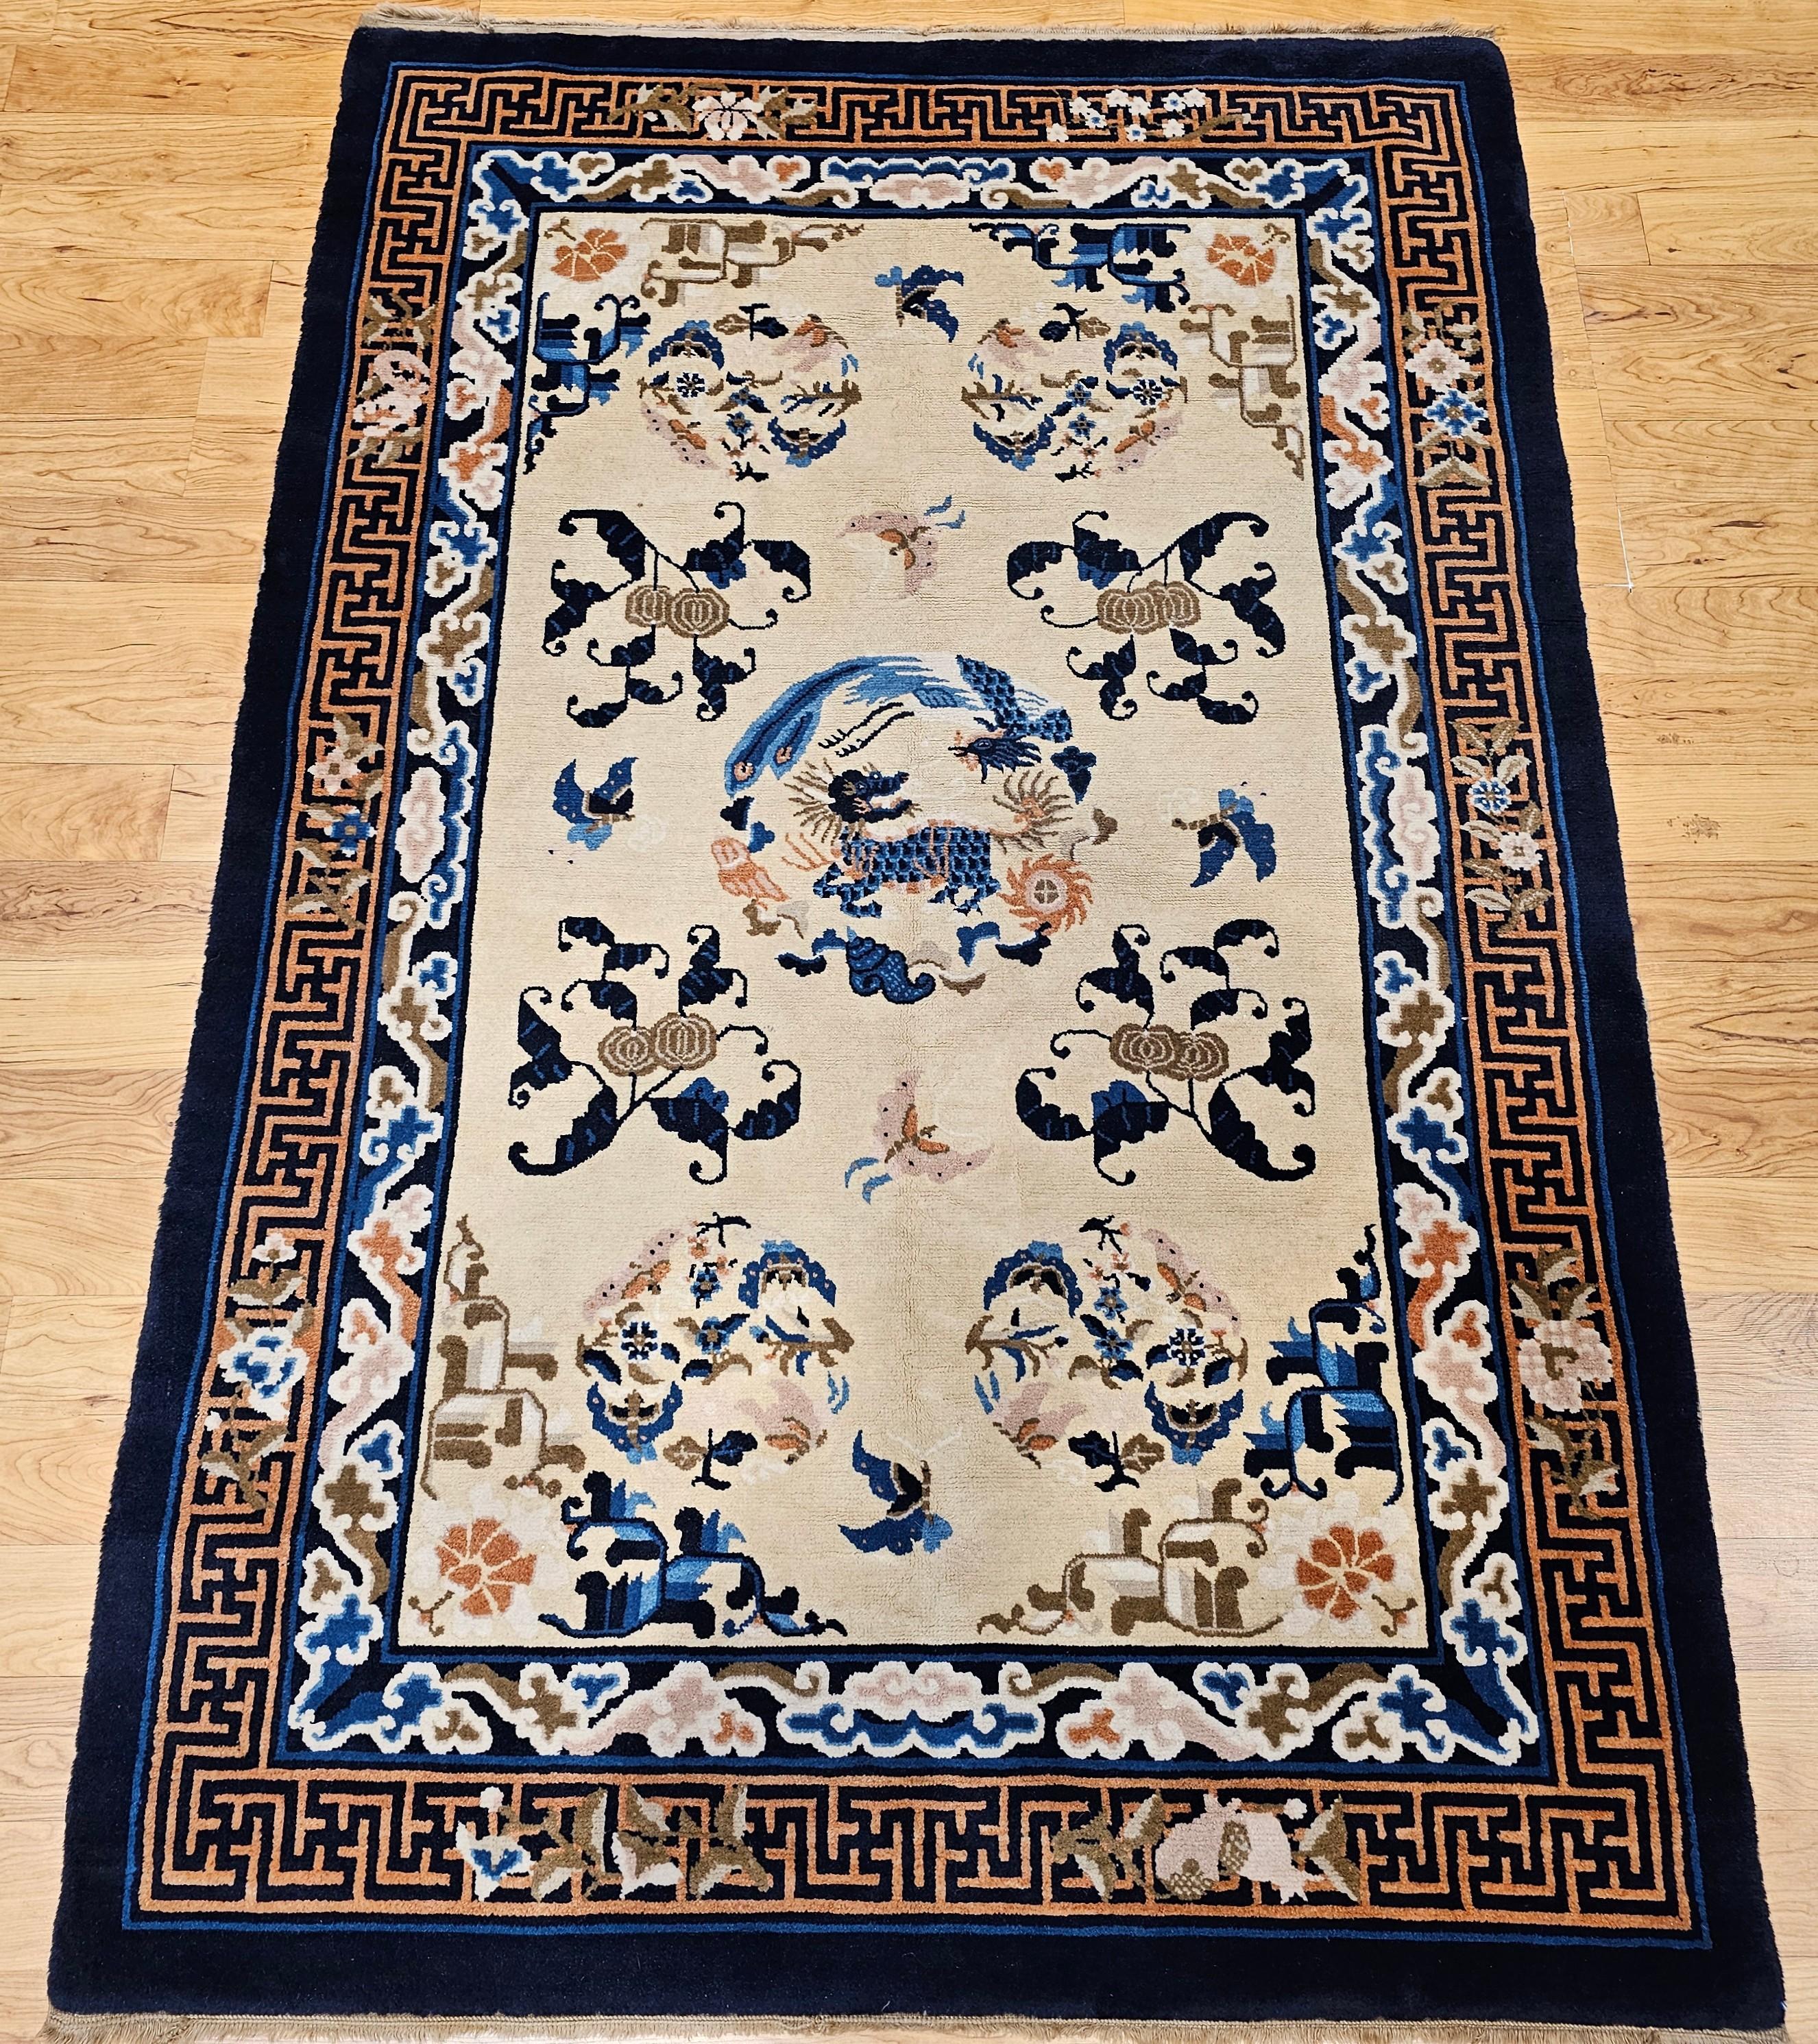 Vintage Chinese Art Deco area rug with auspicious and good fortune symbols including Qilin, phoenix, butterflies, moths and clouds .  The rug has an ivory color field and navy blue border.  The design of the rug has Chinese symbols of happiness,